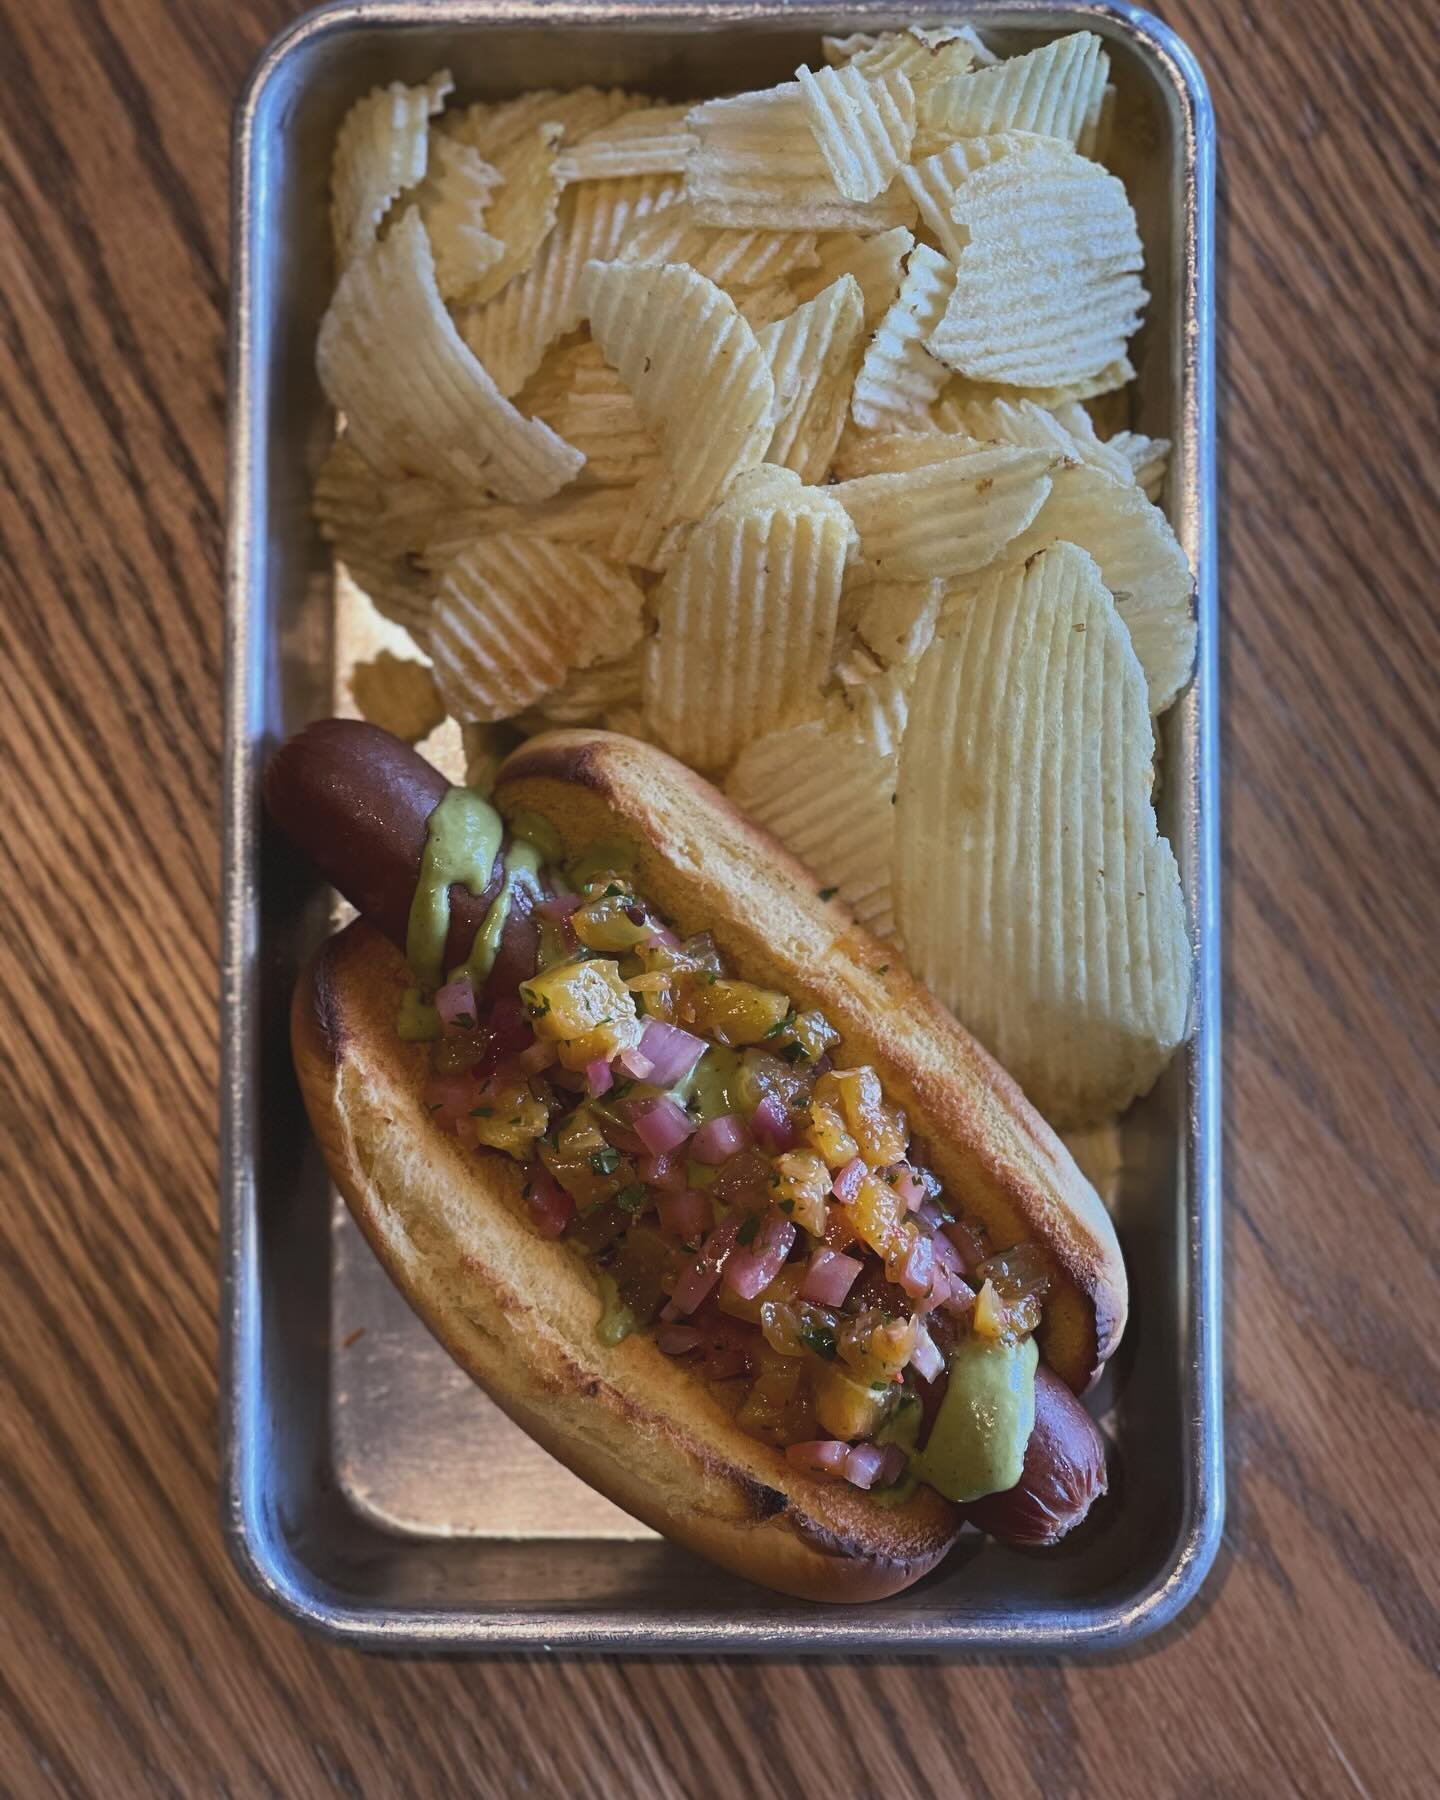 Thursday dog special! 

@originalnathansfranks dog and @potatorolls of course.
But also a chili-crisp-marinated-pineapple-pickled-red-onion salsa and a roasted-poblano sauce. 

Big Fun!

Here till 9pm!